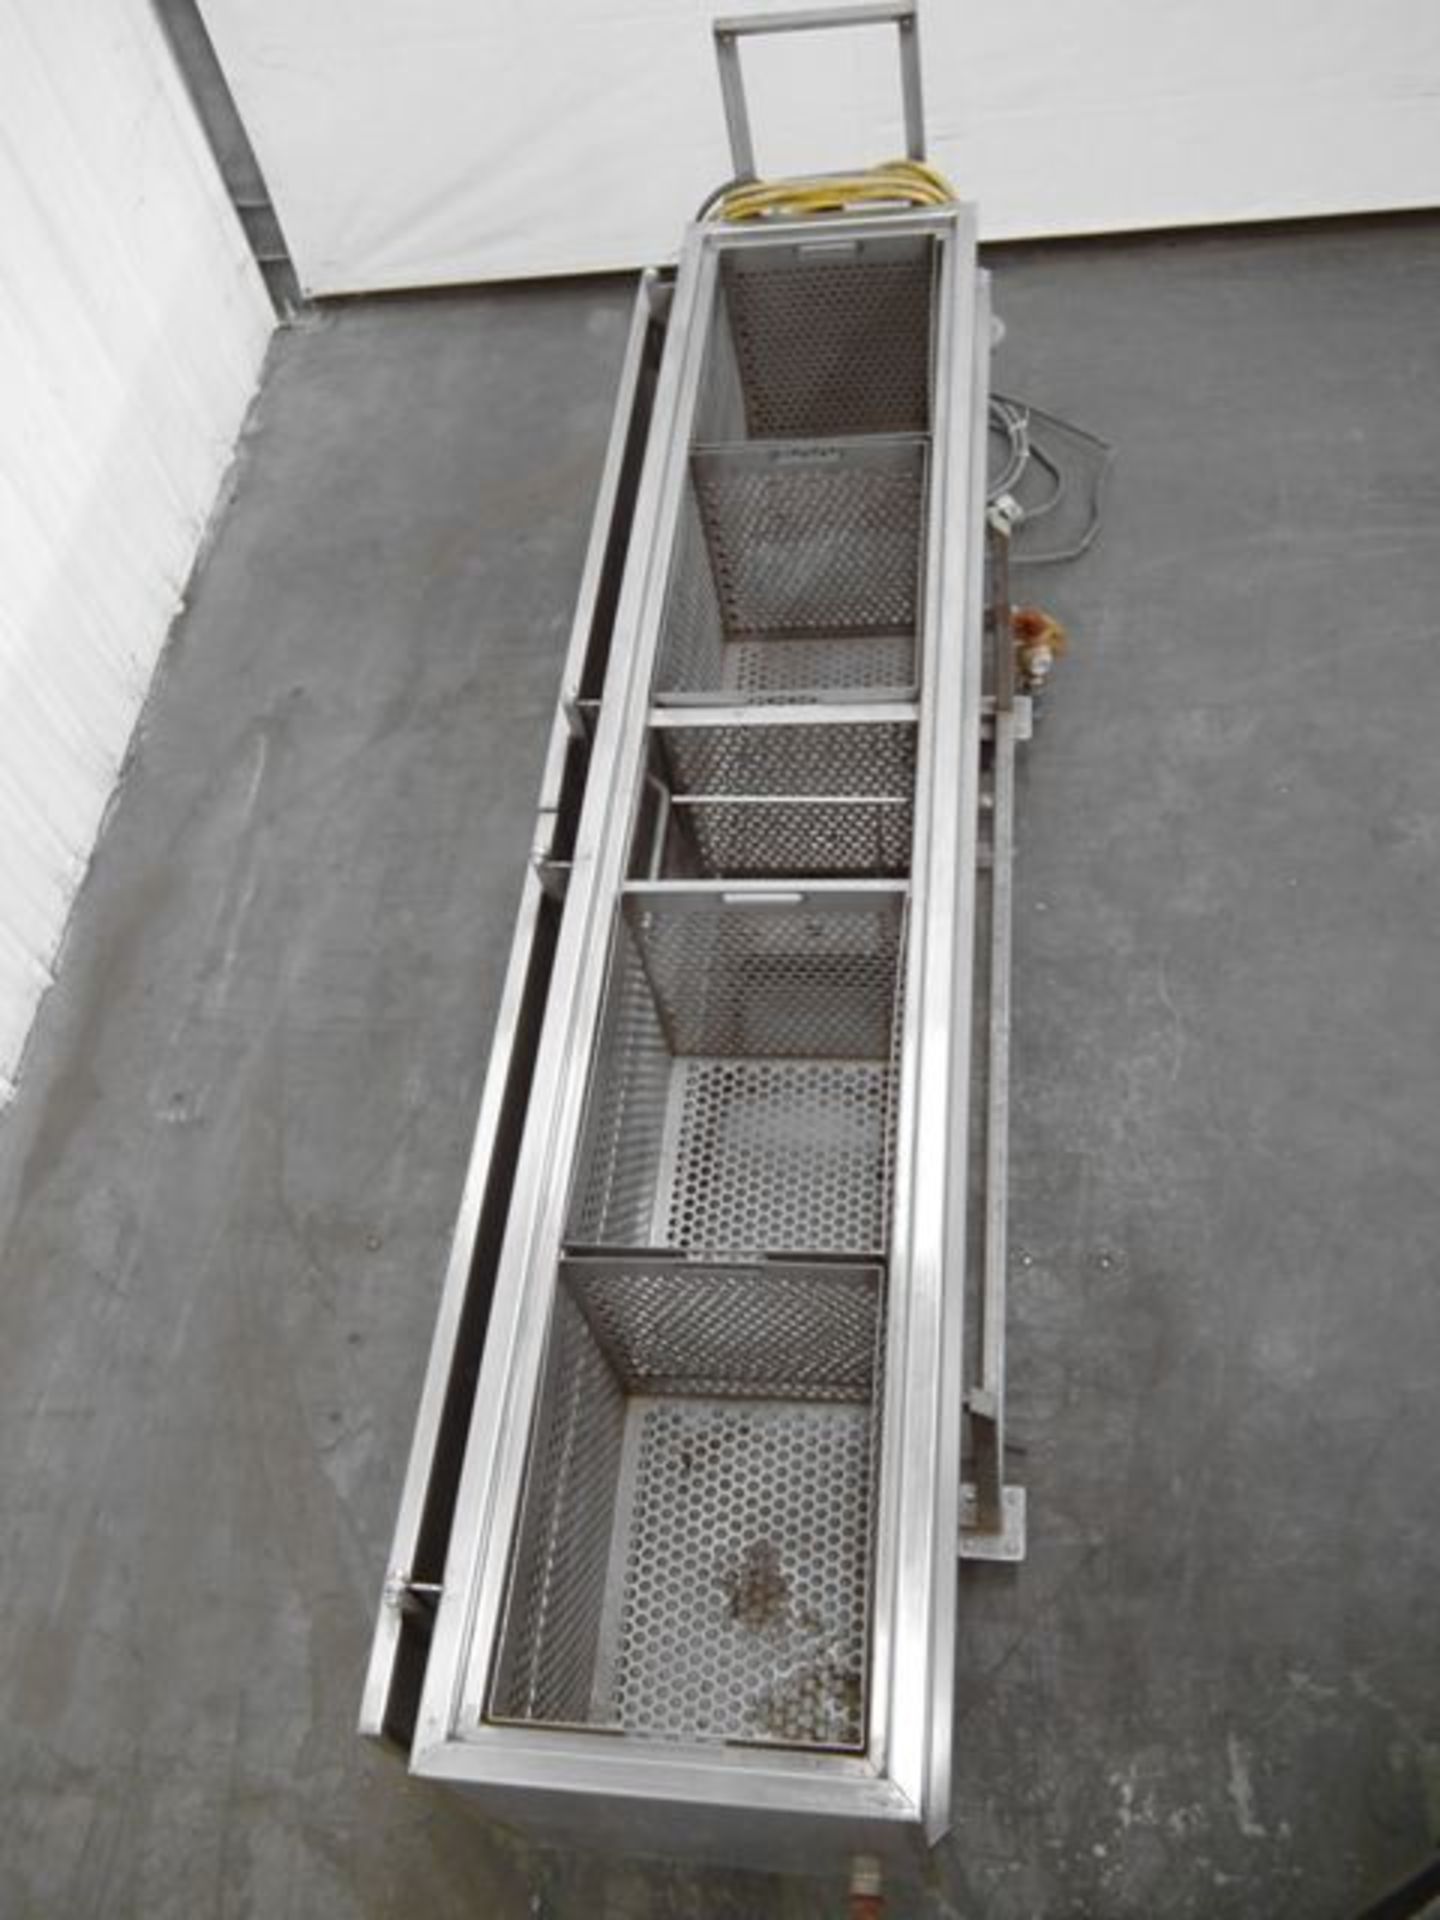 CIP Bath Tank with 4 Compartments - RIGGING AND HANDLING FEES: $120 - Image 4 of 4